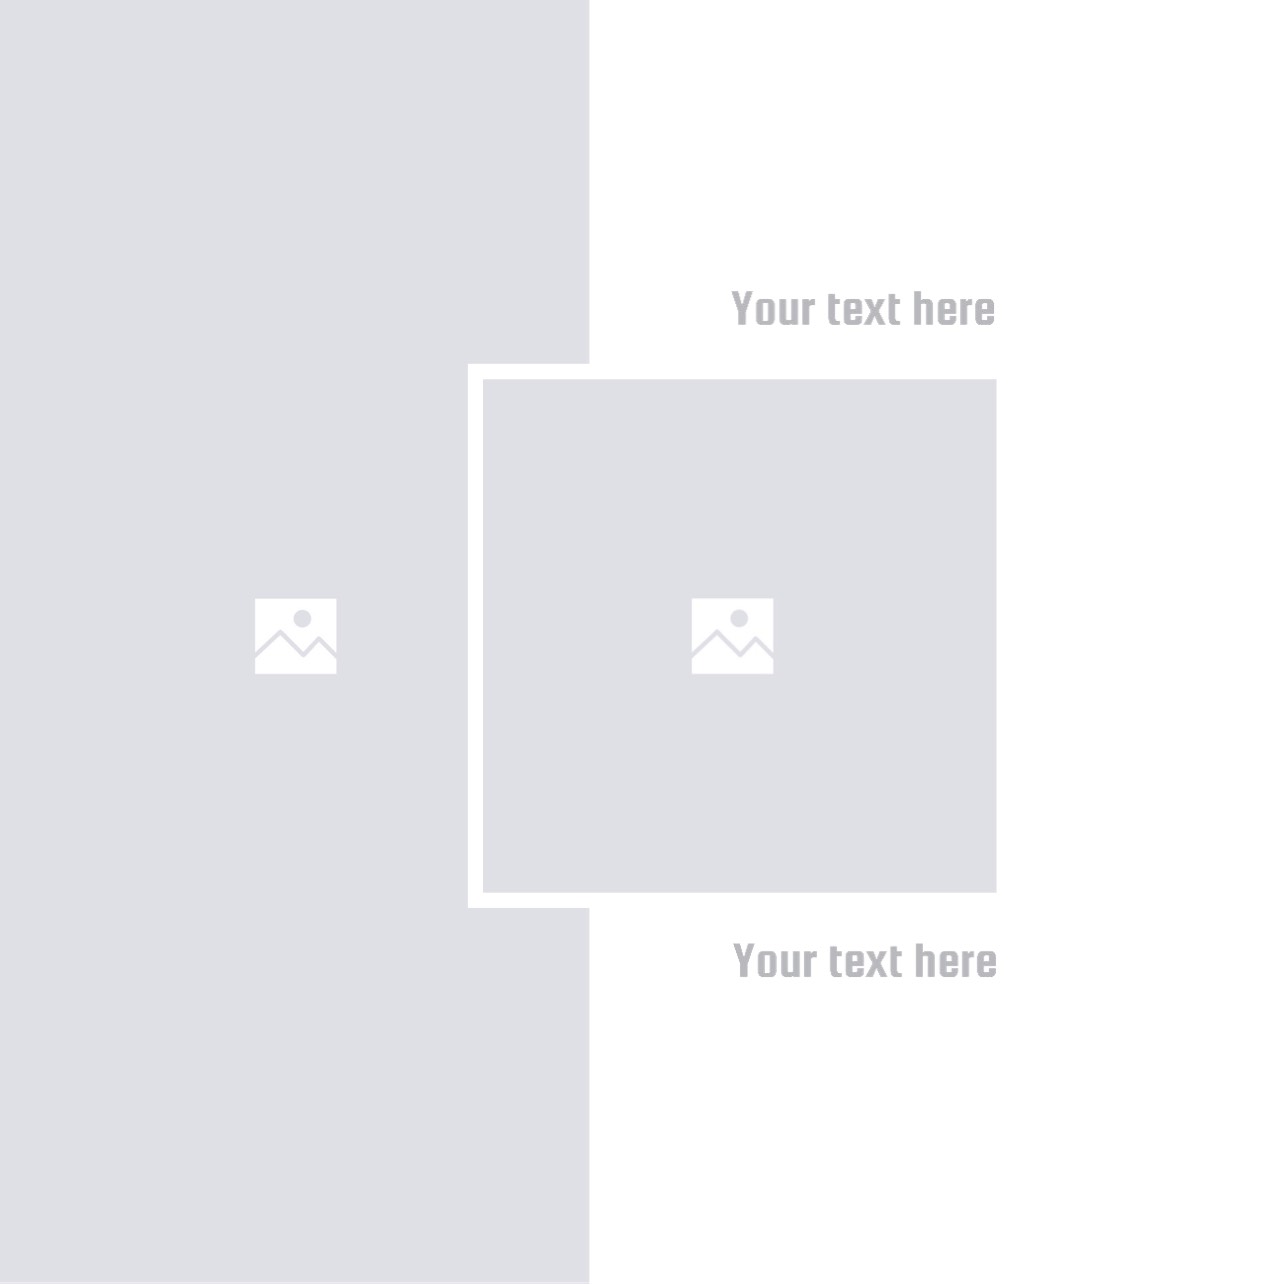 An Image Of A White Square With Text Layouts Template